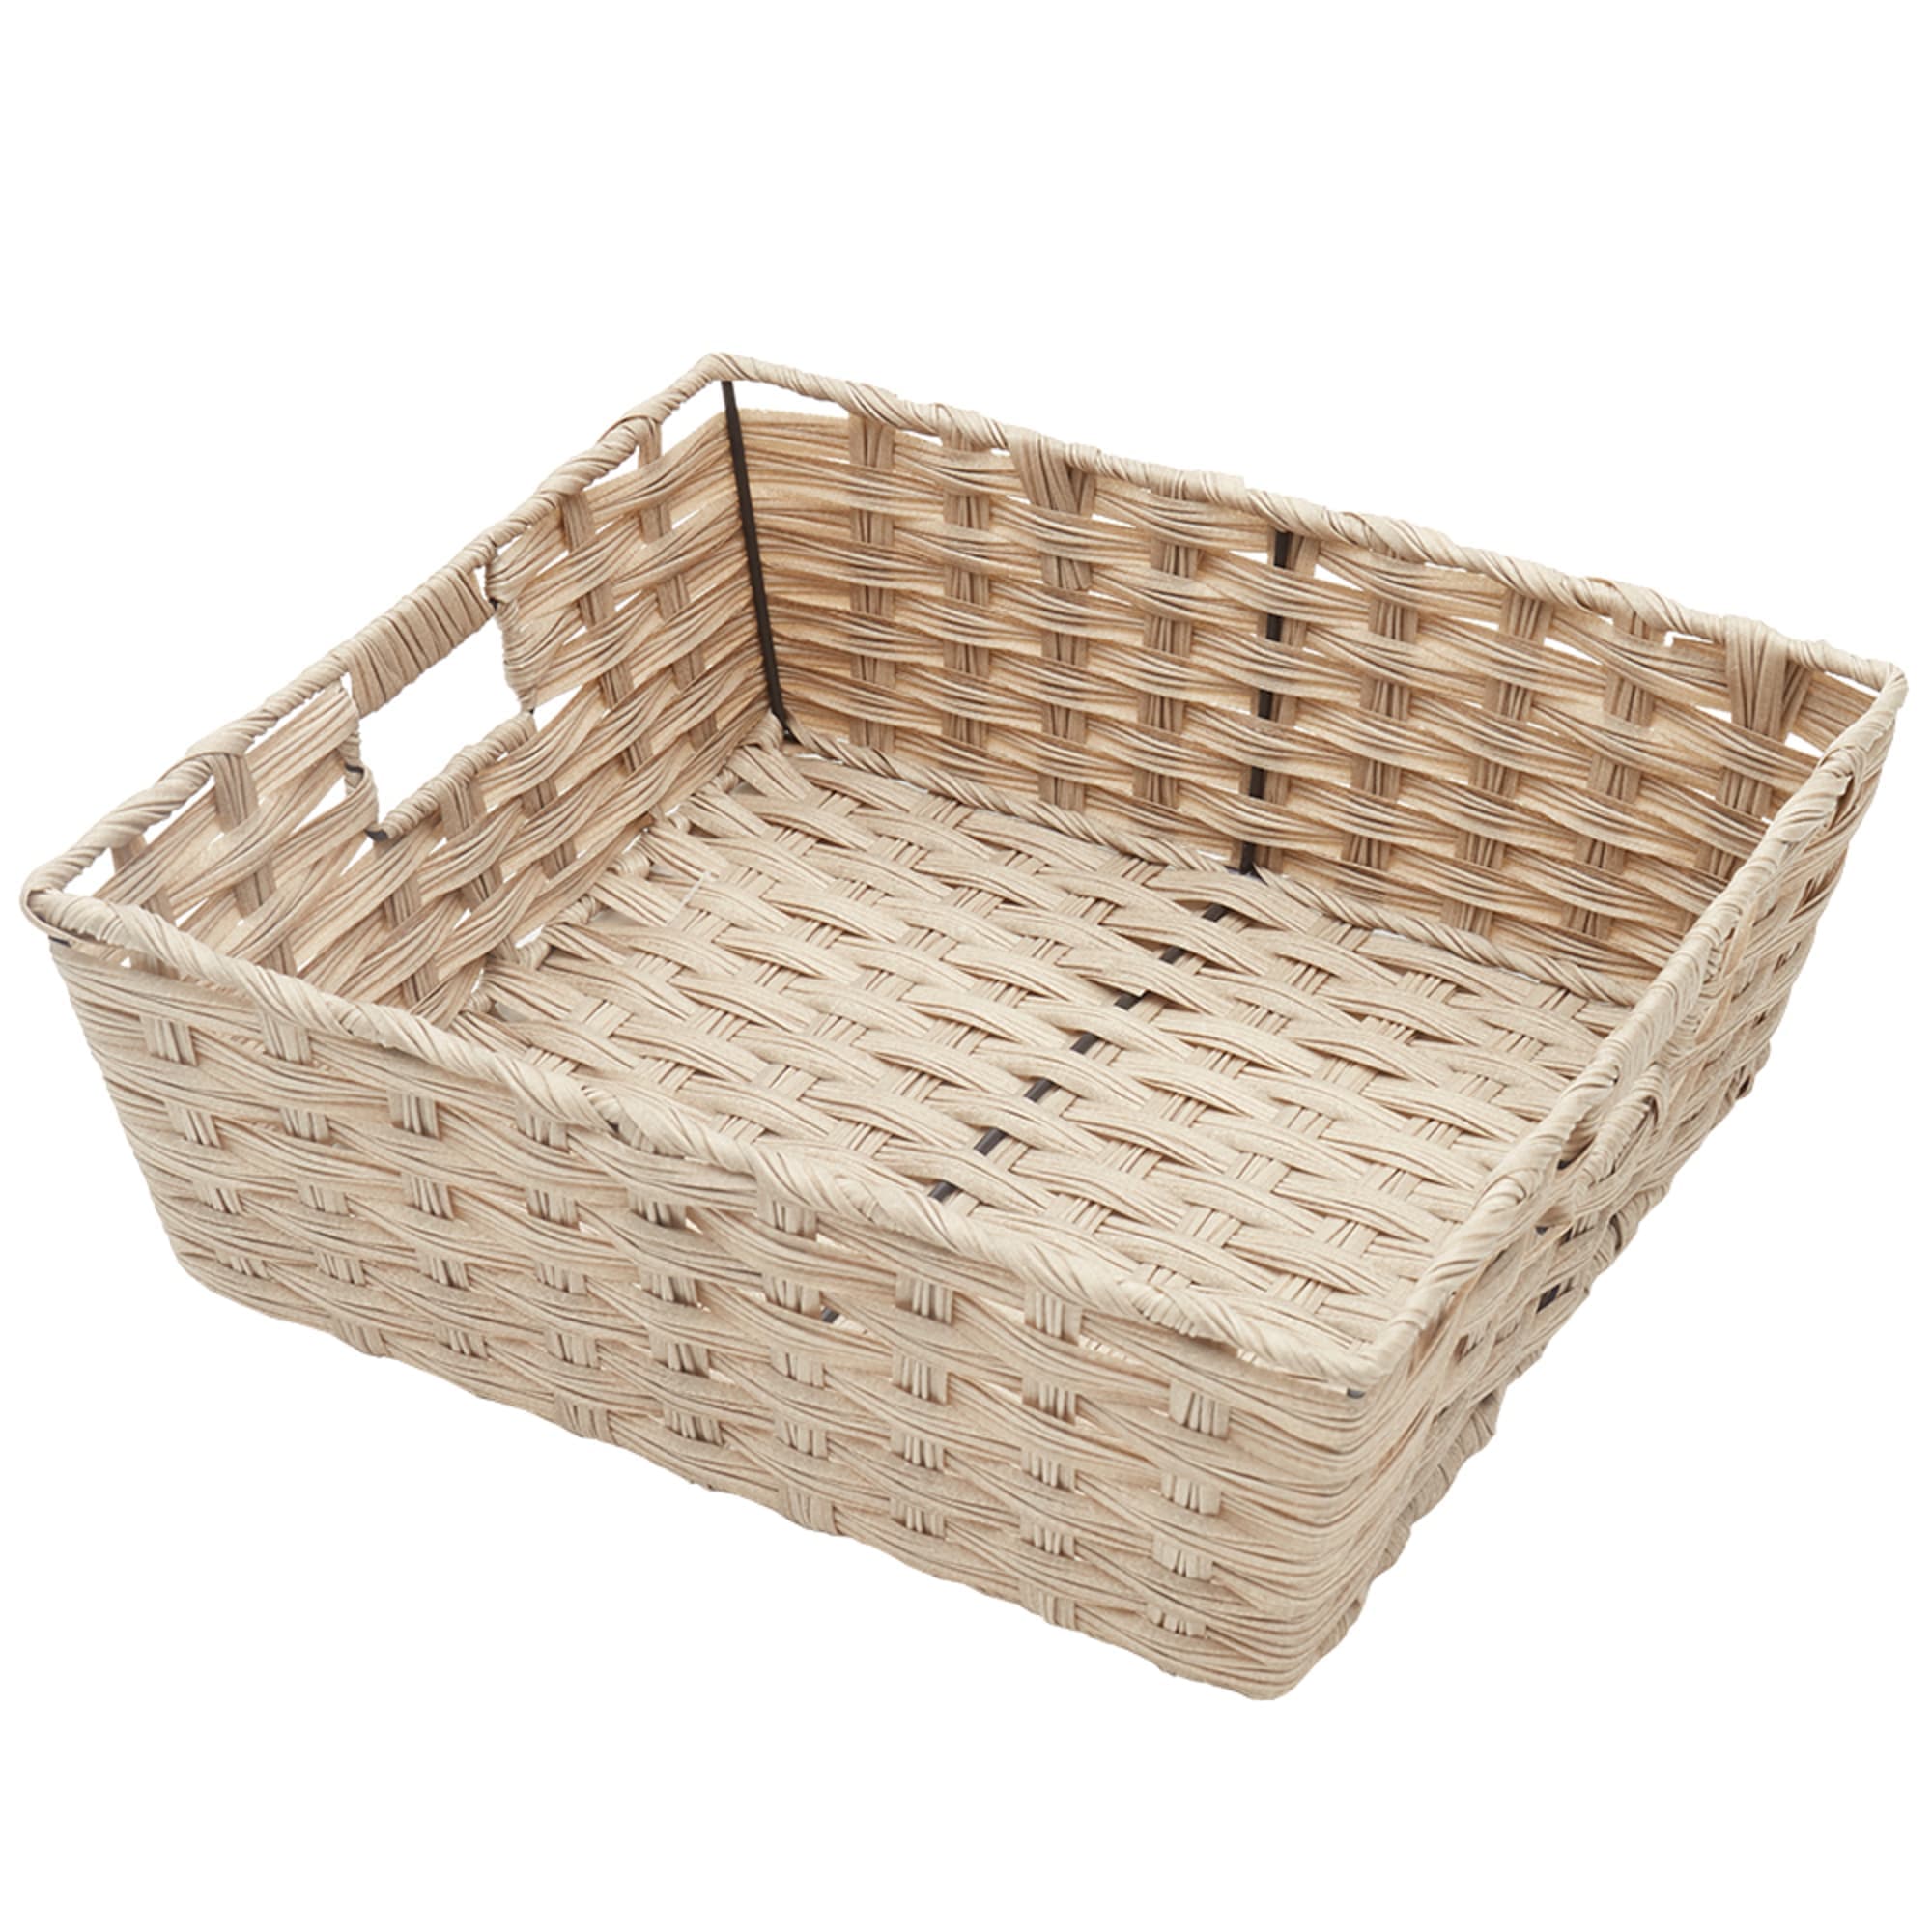 Home Basics Large Faux Rattan Basket with Cut-out Handles, Taupe $10.00 EACH, CASE PACK OF 6